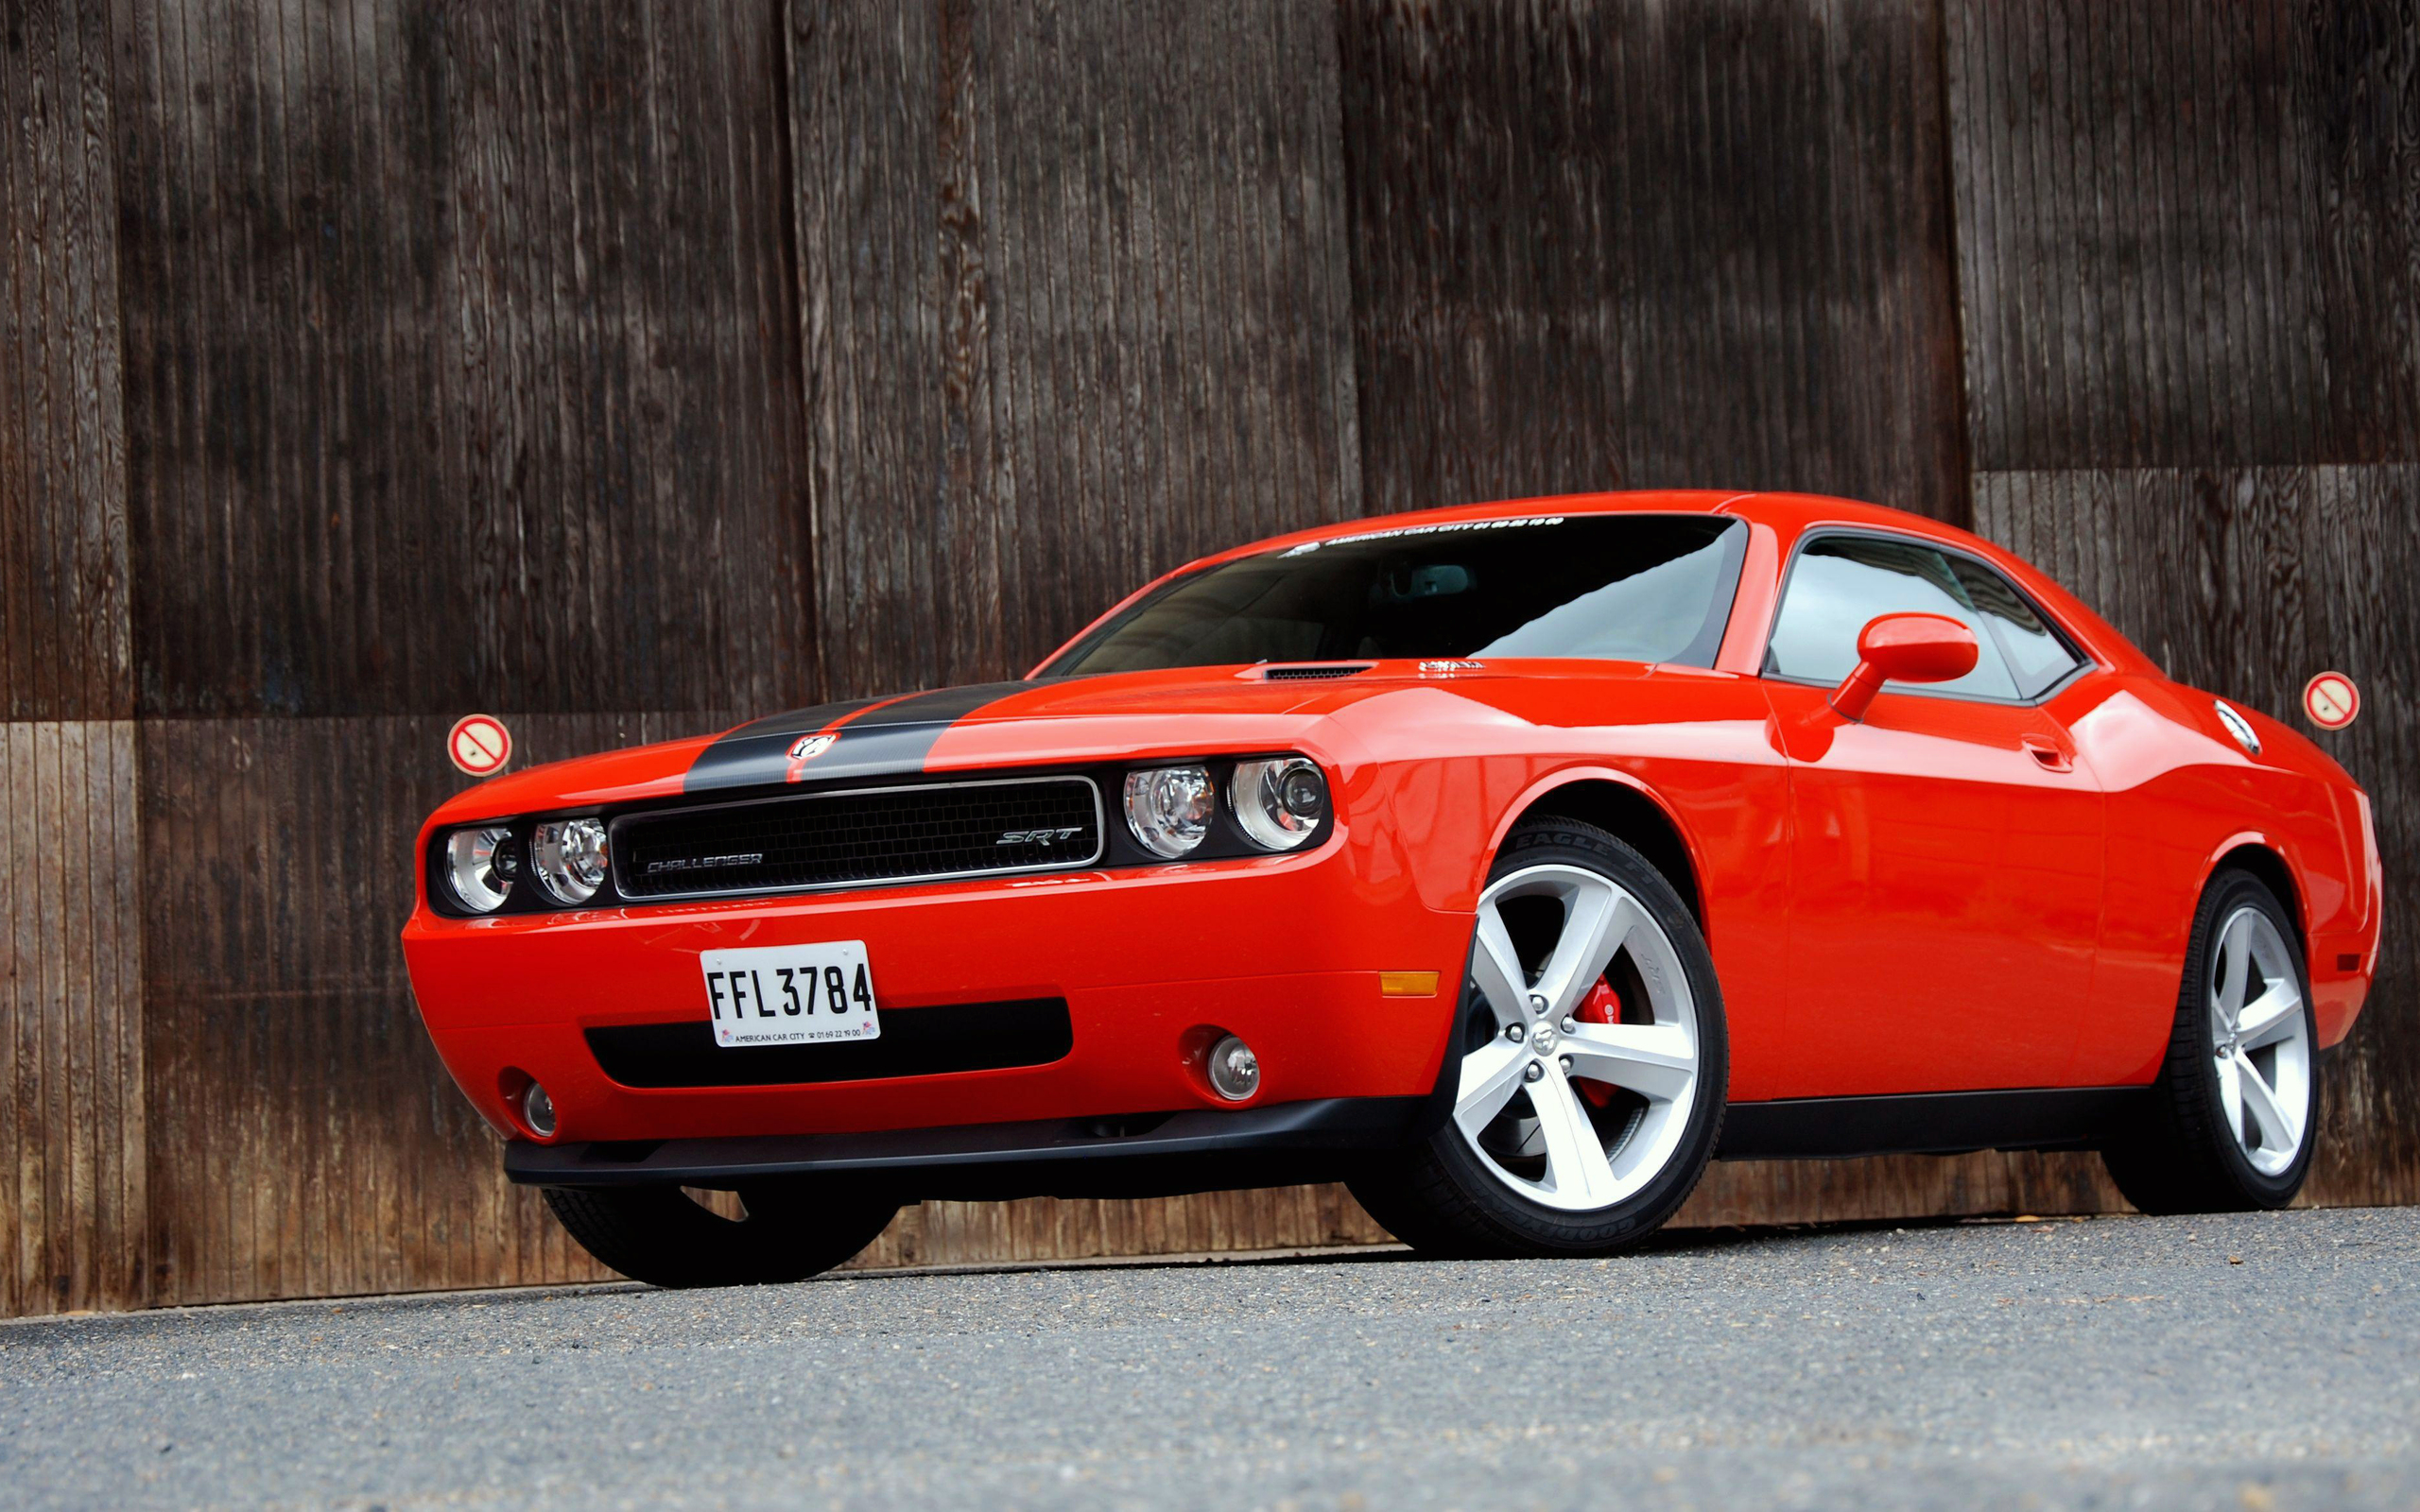 Wallpapers Dodge Challenger Muscle Car on the desktop